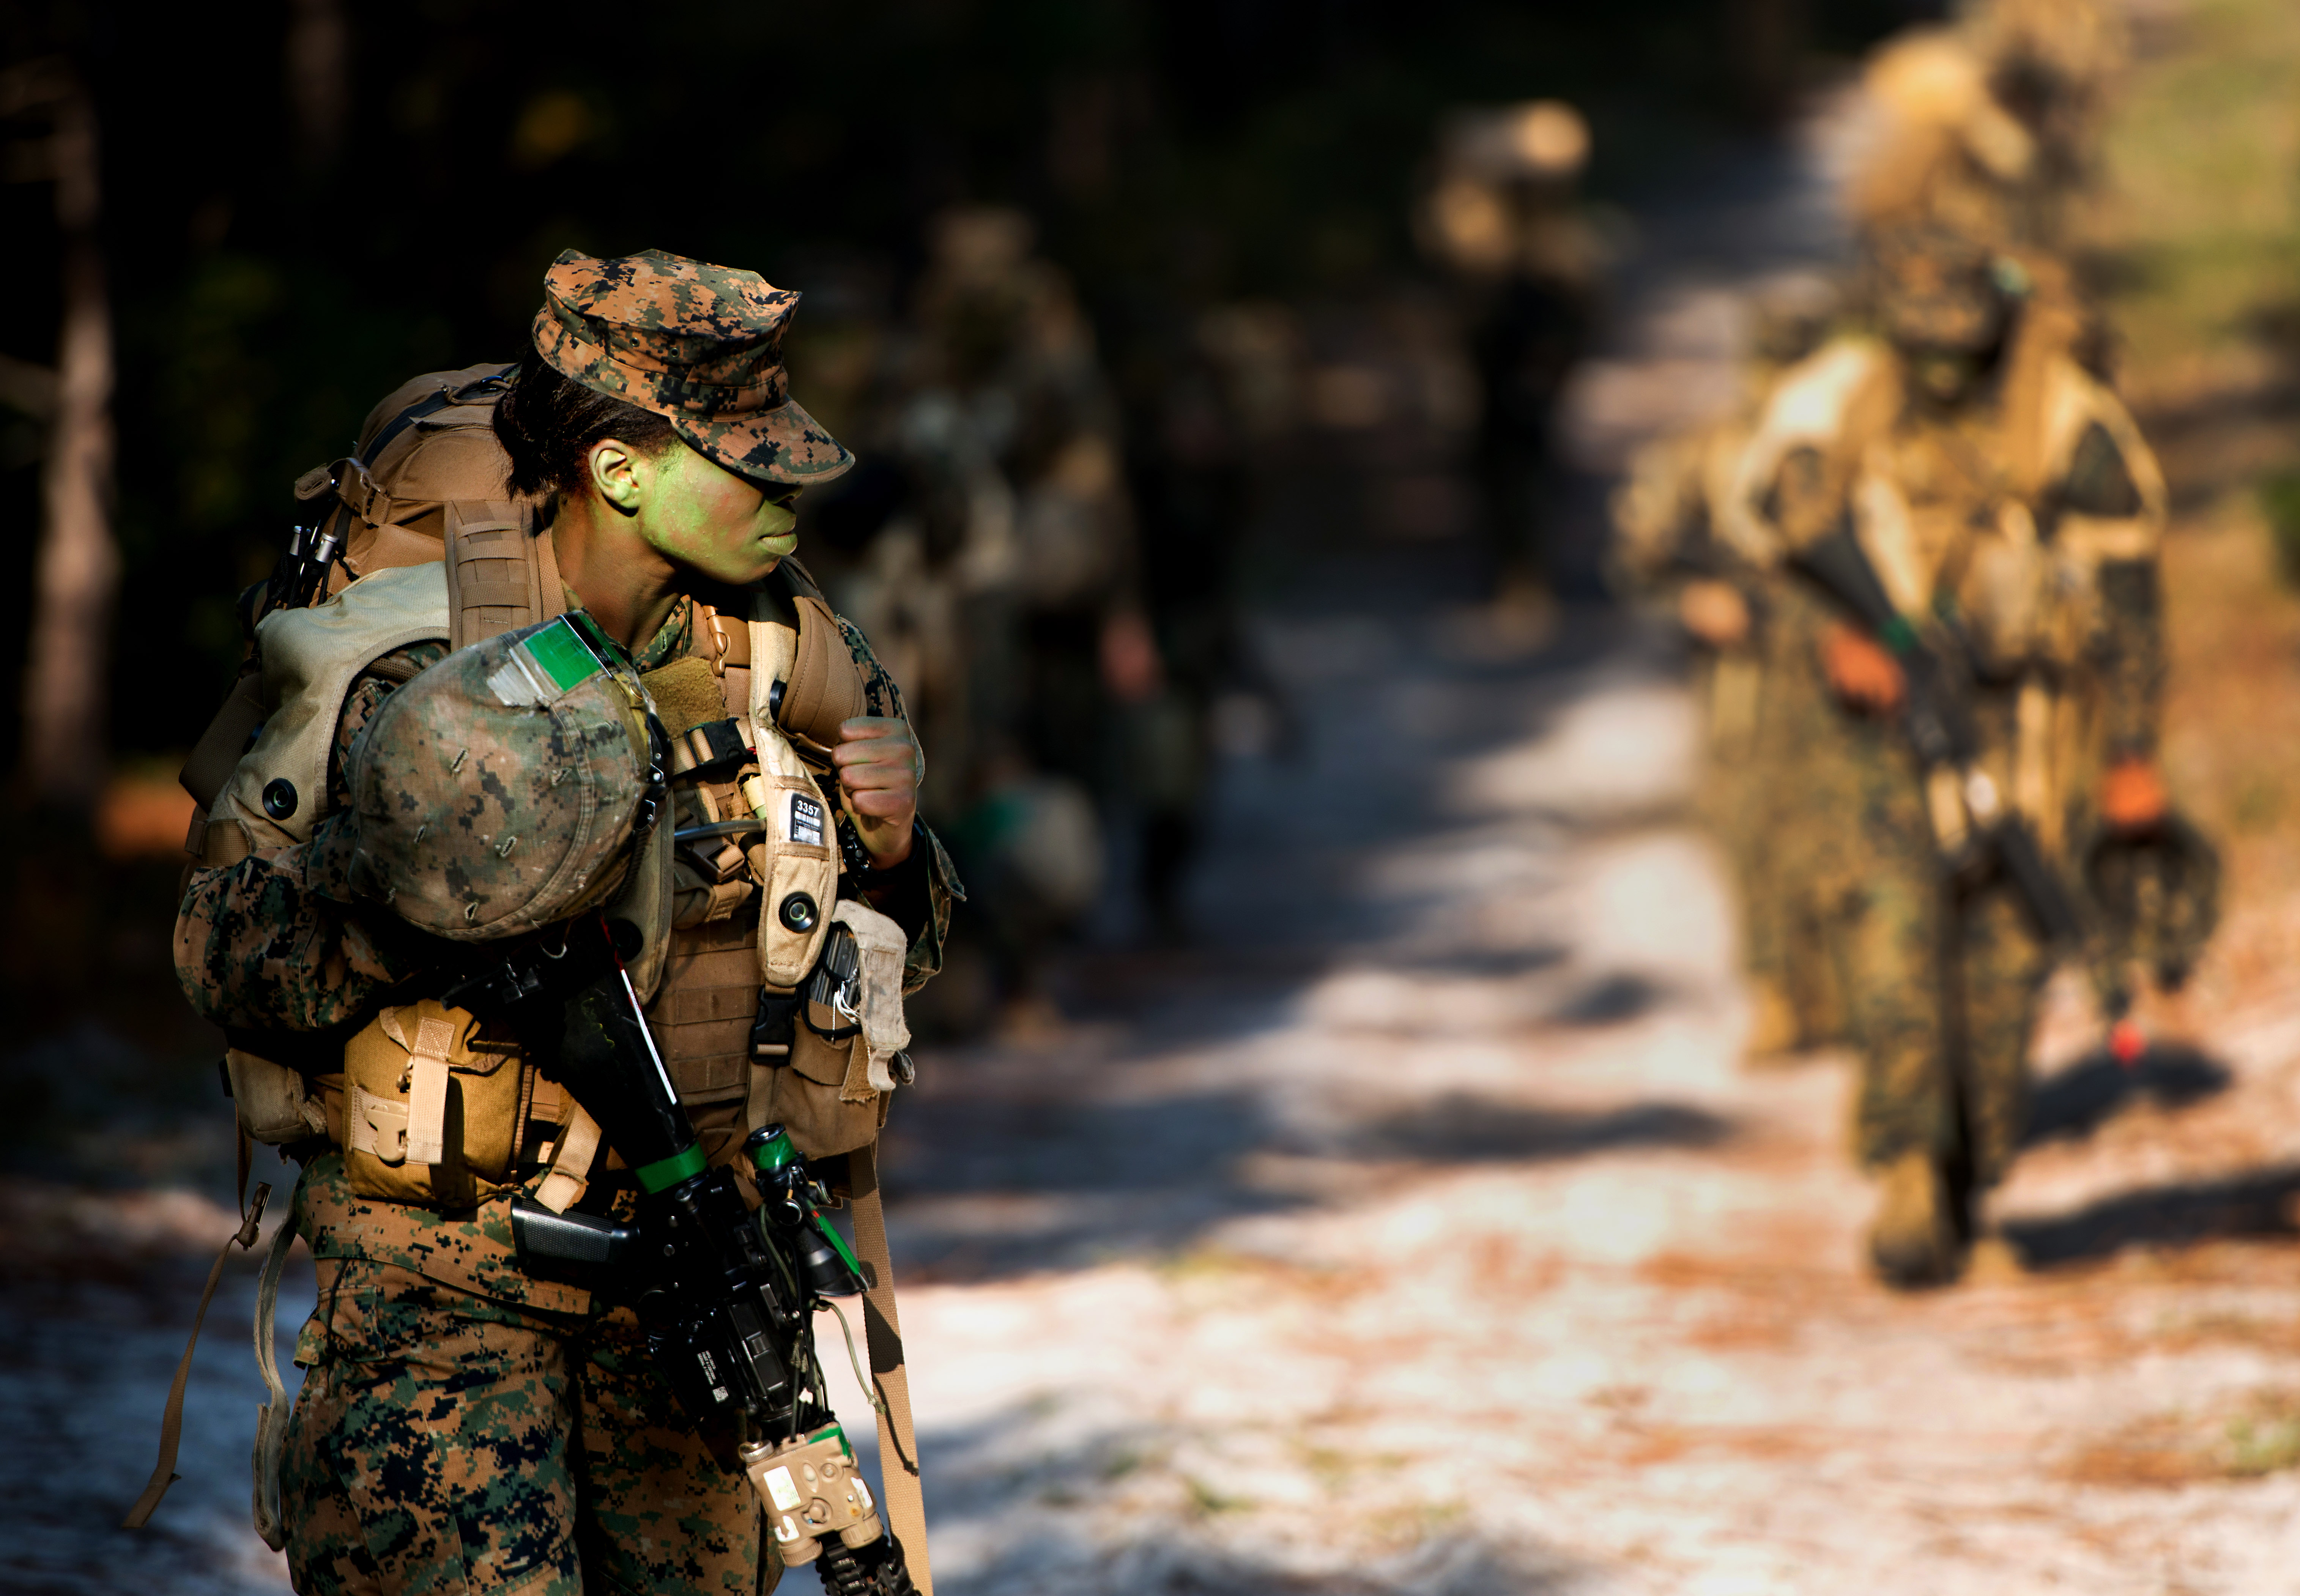 A female Marine participates in Infantry training in 2013. US Marine Corps photo